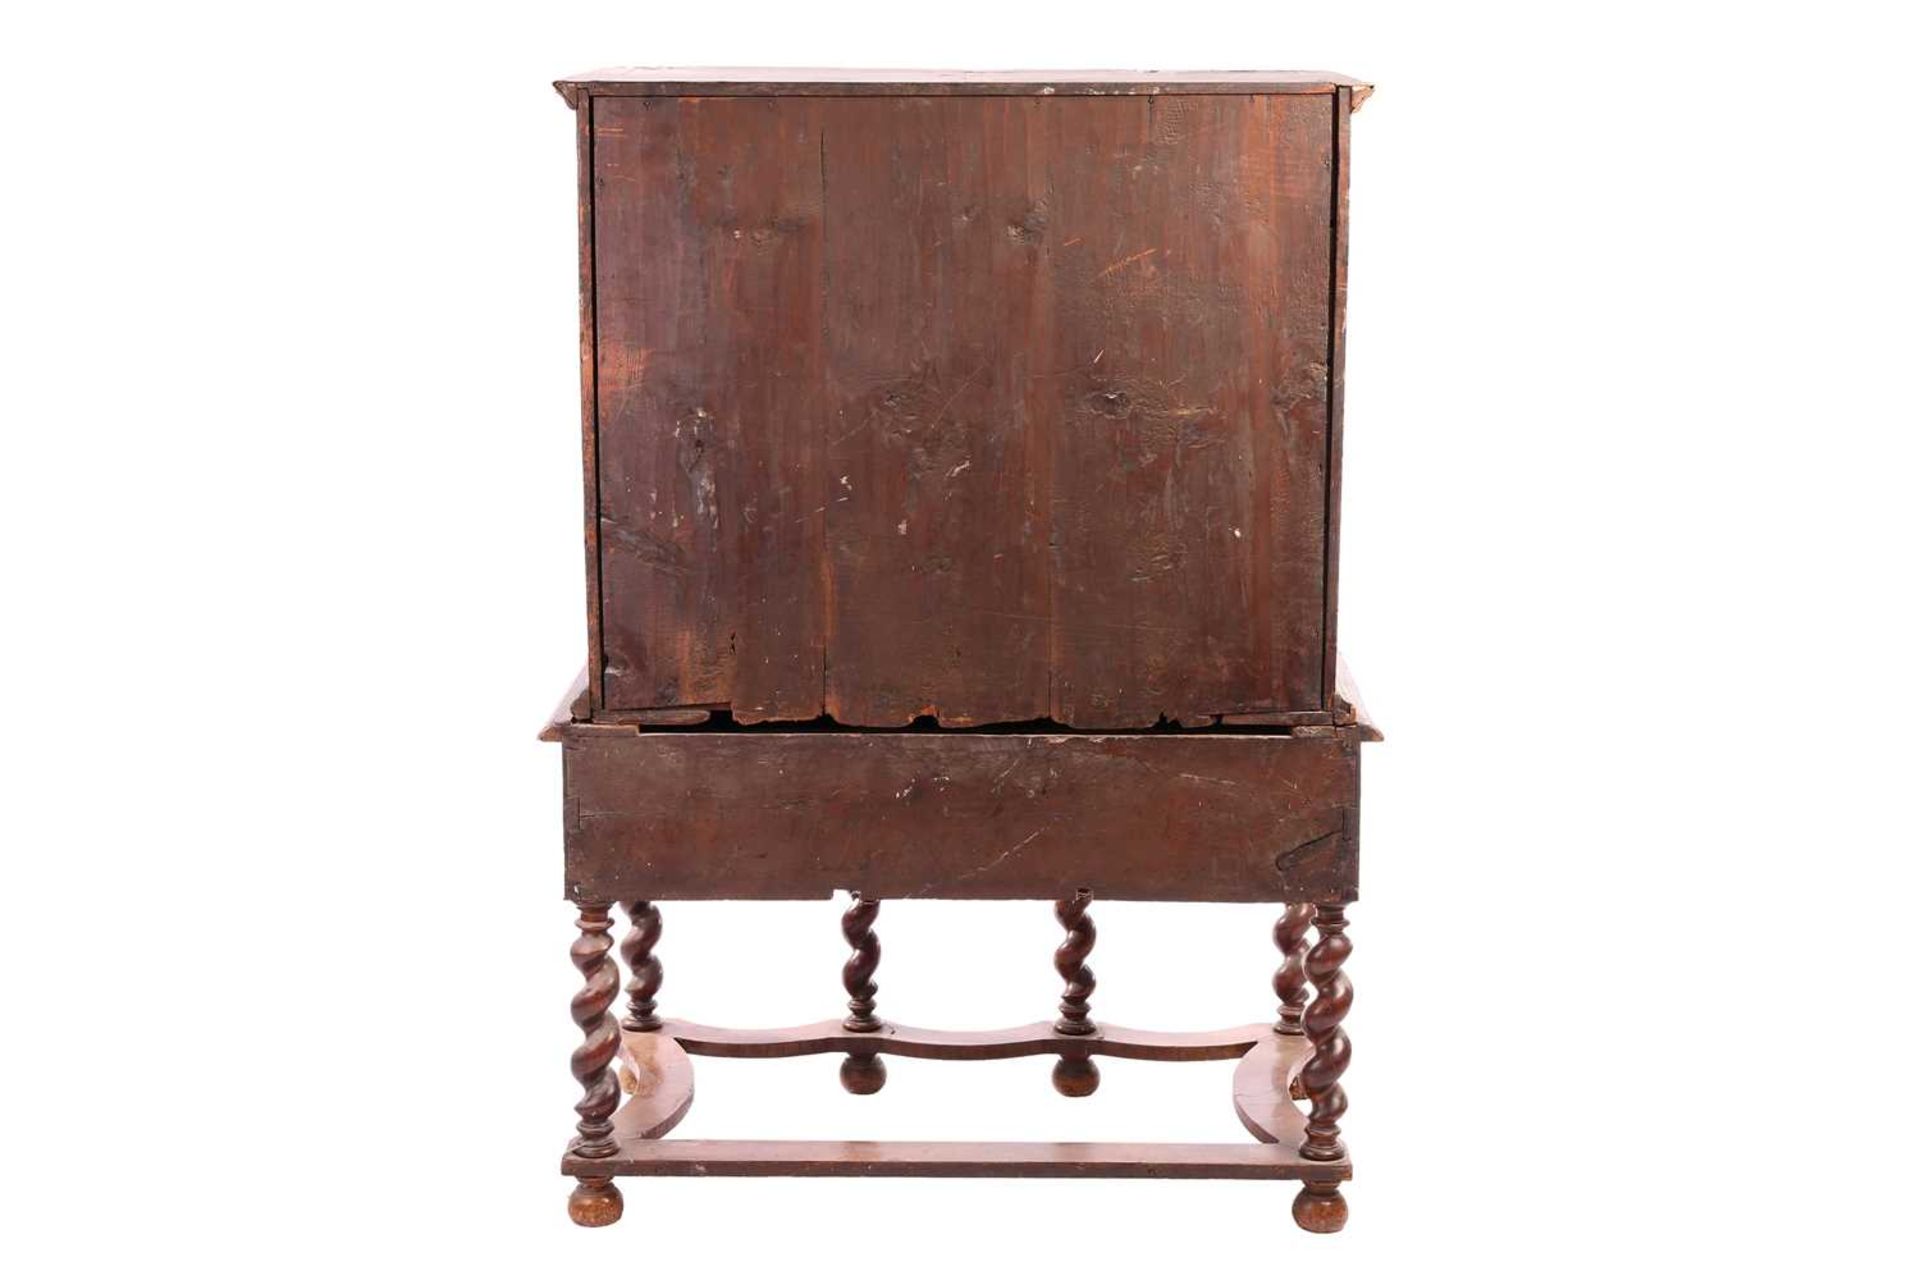 A 17th-century and later figured walnut chest on stand, the upper section with quarter veneered top  - Image 2 of 22